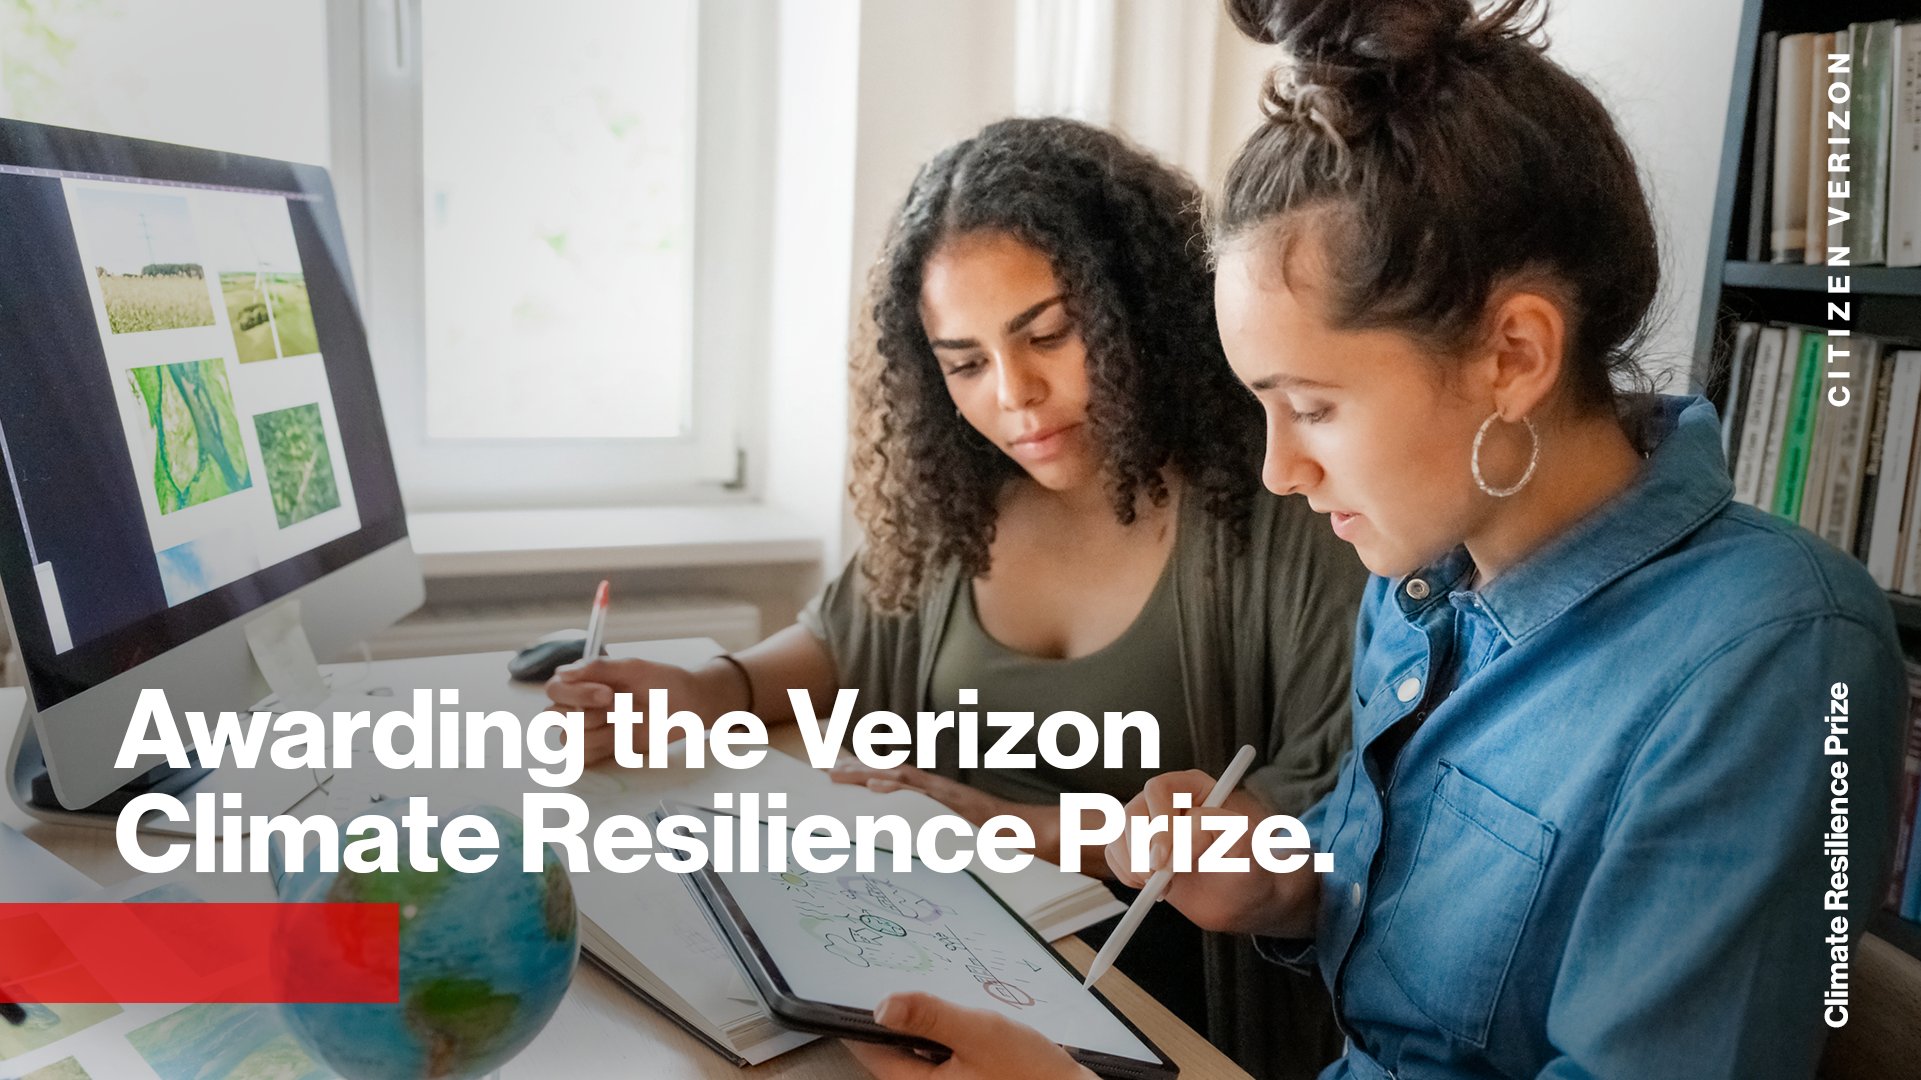 Verizon Climate Resilience Award Winners Receive $500k to Scale Climate Solutions